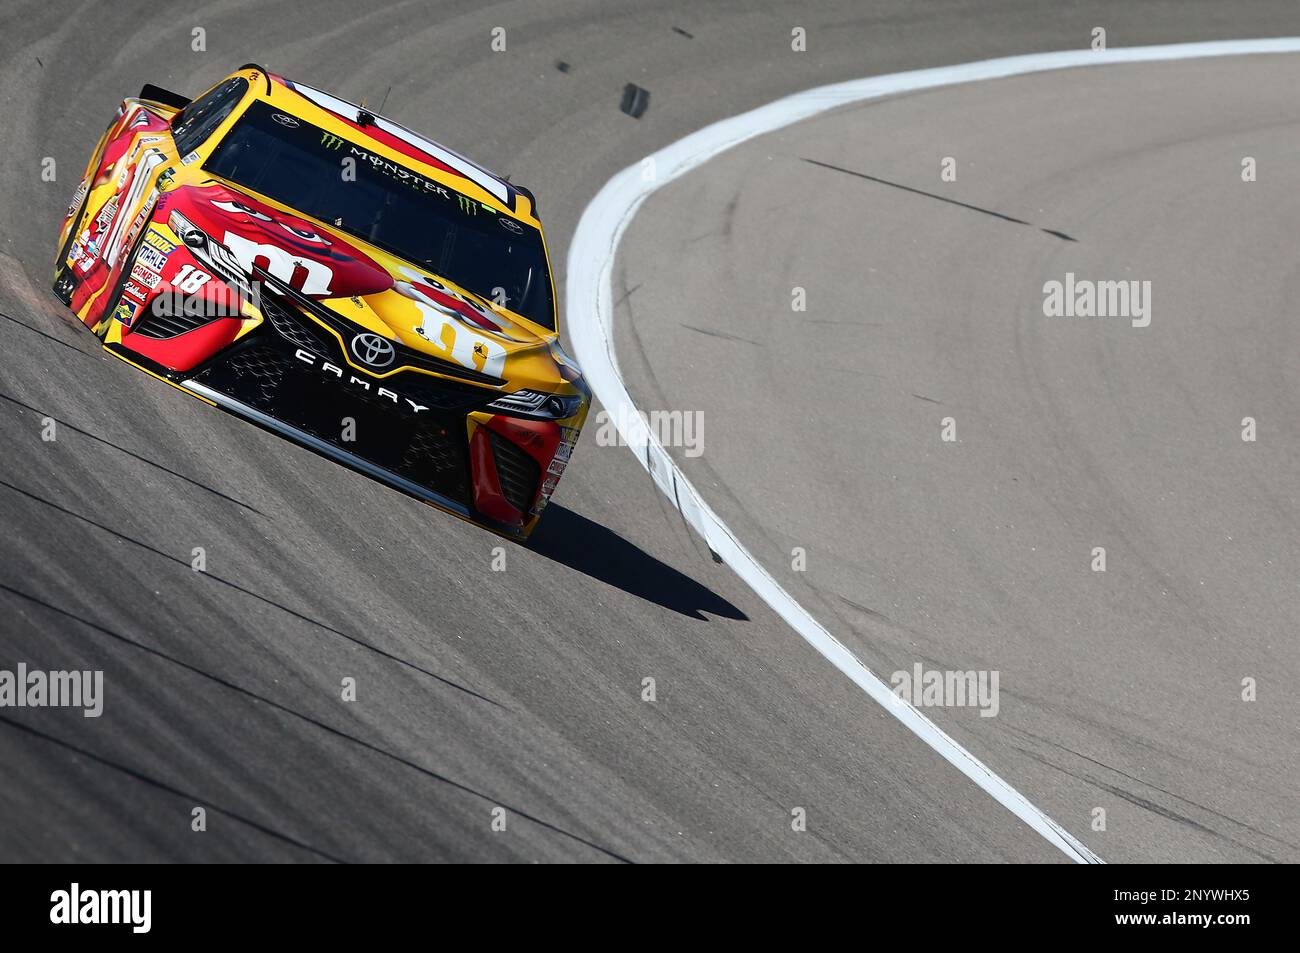 Kyle Busch (18) during practice for the NASCAR Go Bowling 400 race at  Kansas Speedway, Friday, May 12, 2017, in Kansas City, Kan. (Brett  Moist/NKP via AP) MANDATORY CREDIT Stock Photo - Alamy